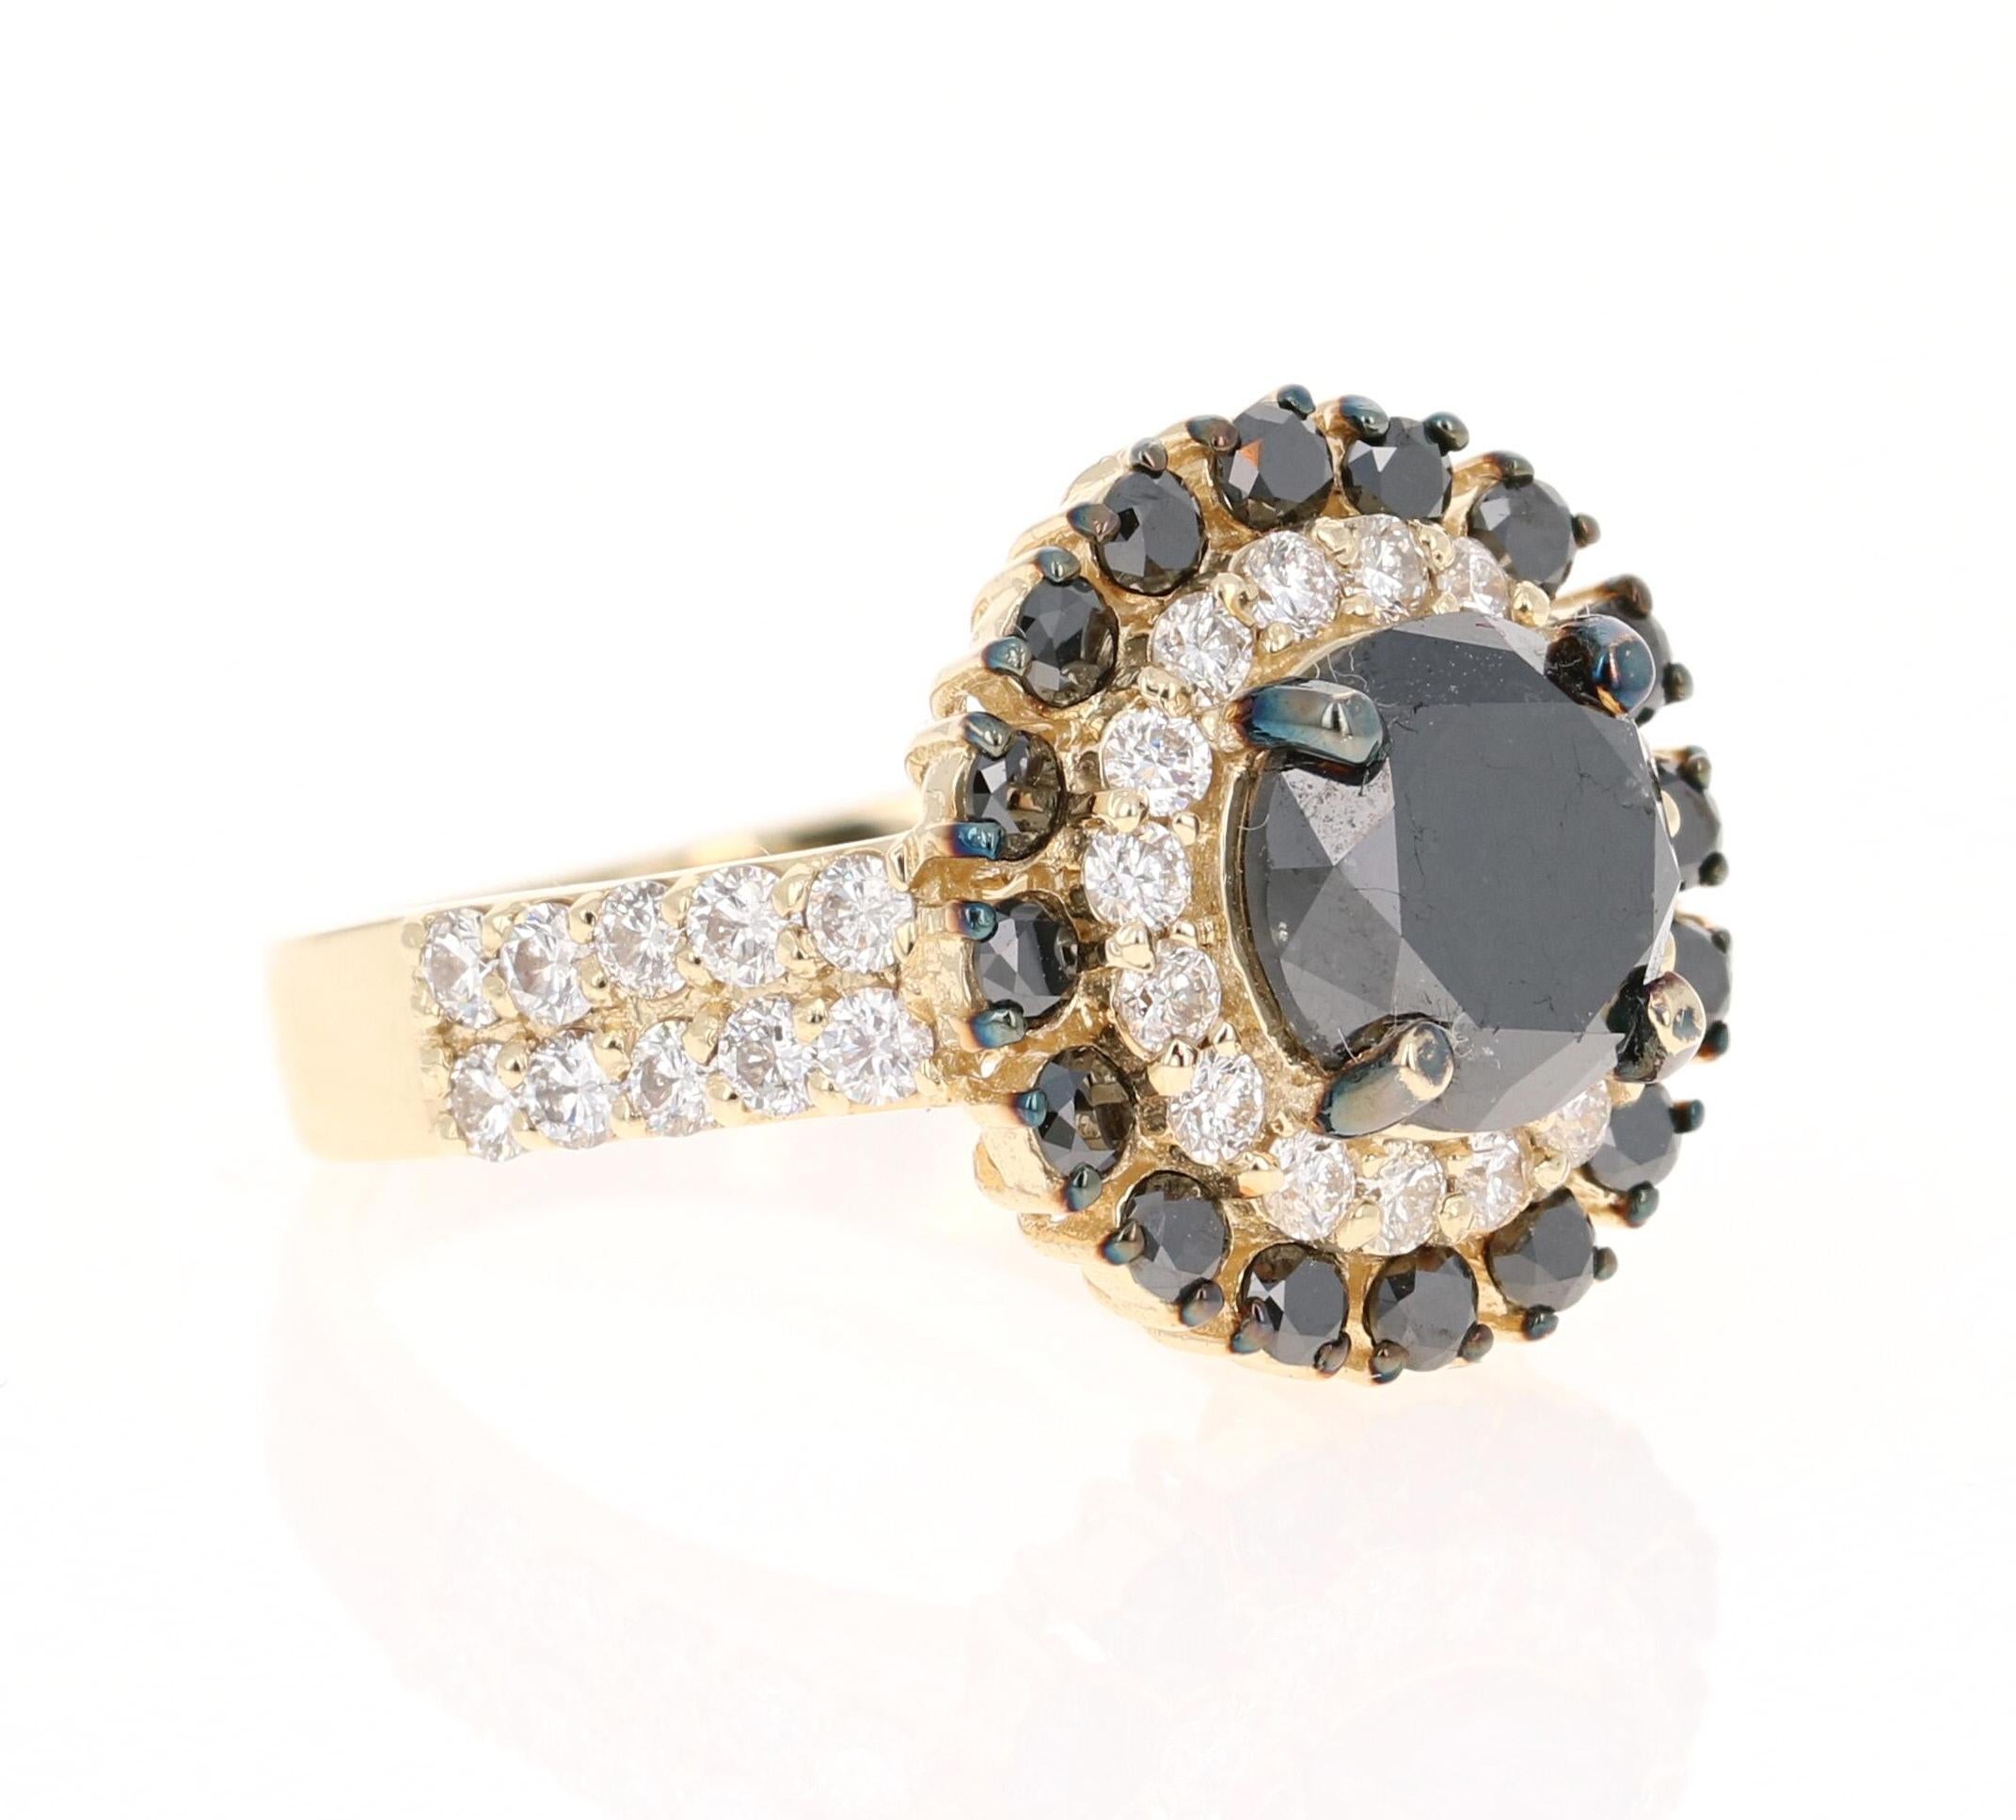 This Black and White Diamond Ring is the most unique and beautiful Engagement Ring!

The Round Cut Black Diamond is 2.79 Carats and its gorgeous setting holds 16 Black Round Cut Diamonds weighing 0.75 Carats and 36 Round Cut Diamonds that weigh 1.00